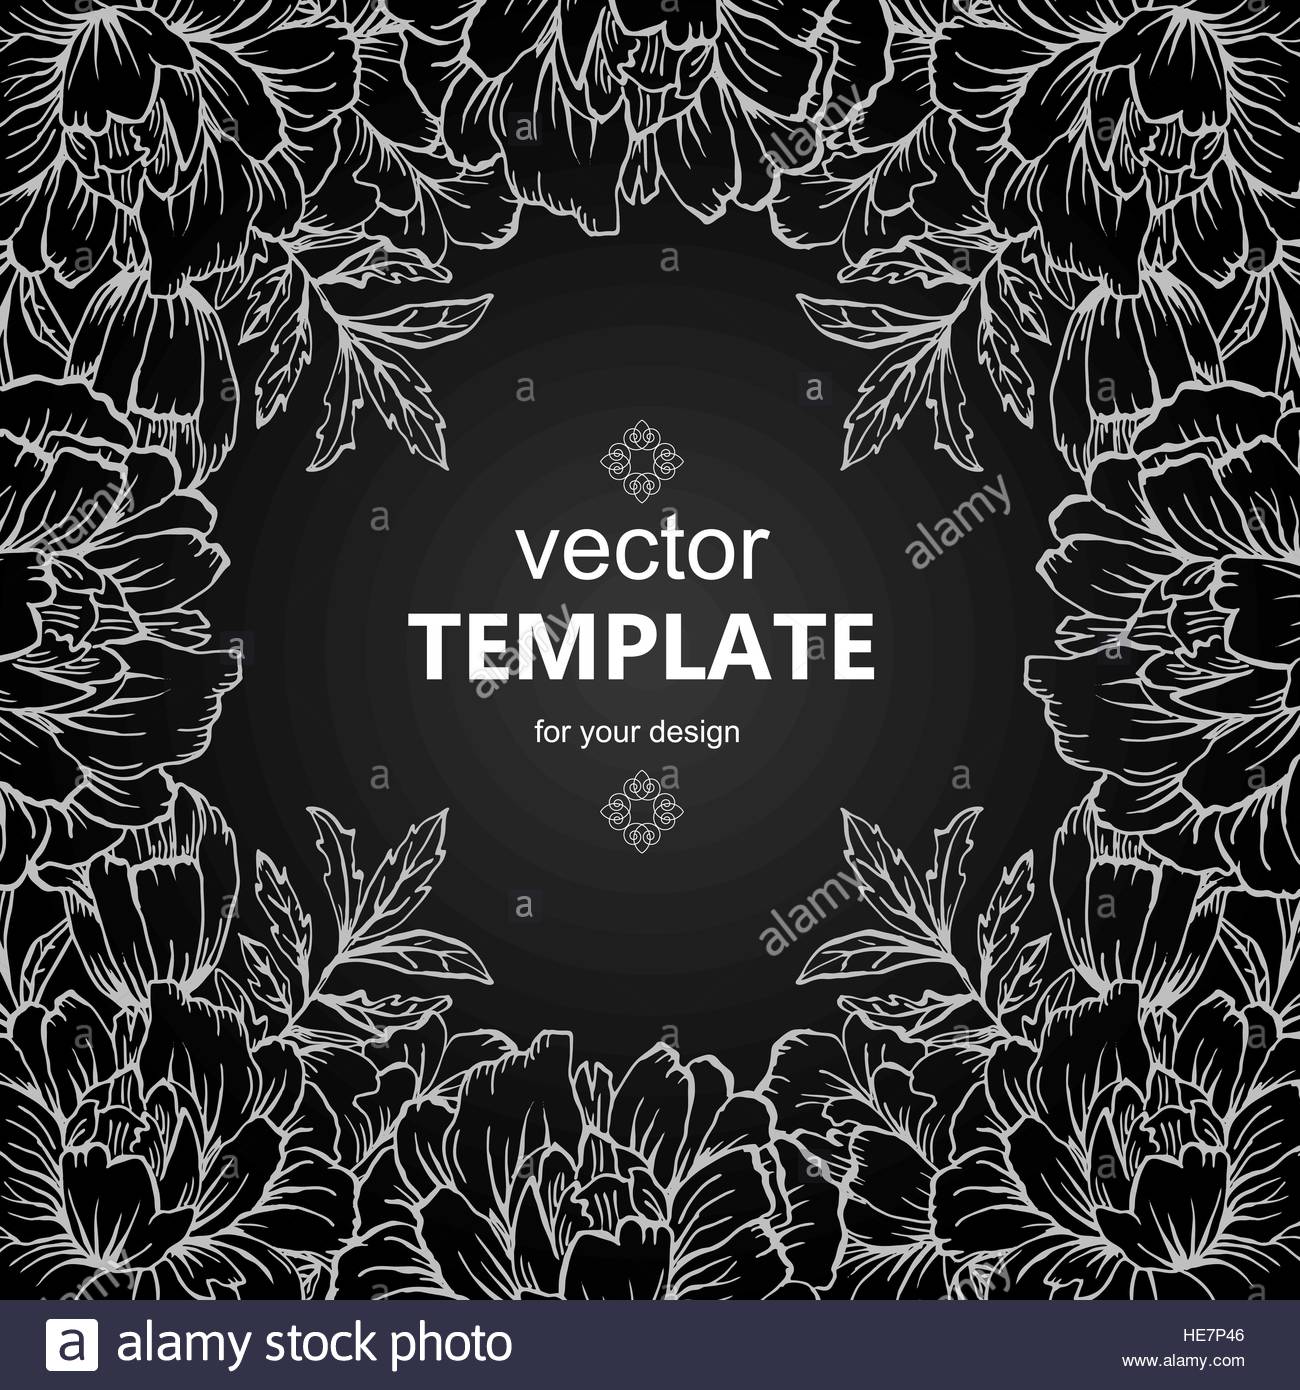 Ornate Floral Flyer With Flowers Doodle Sharpie Background